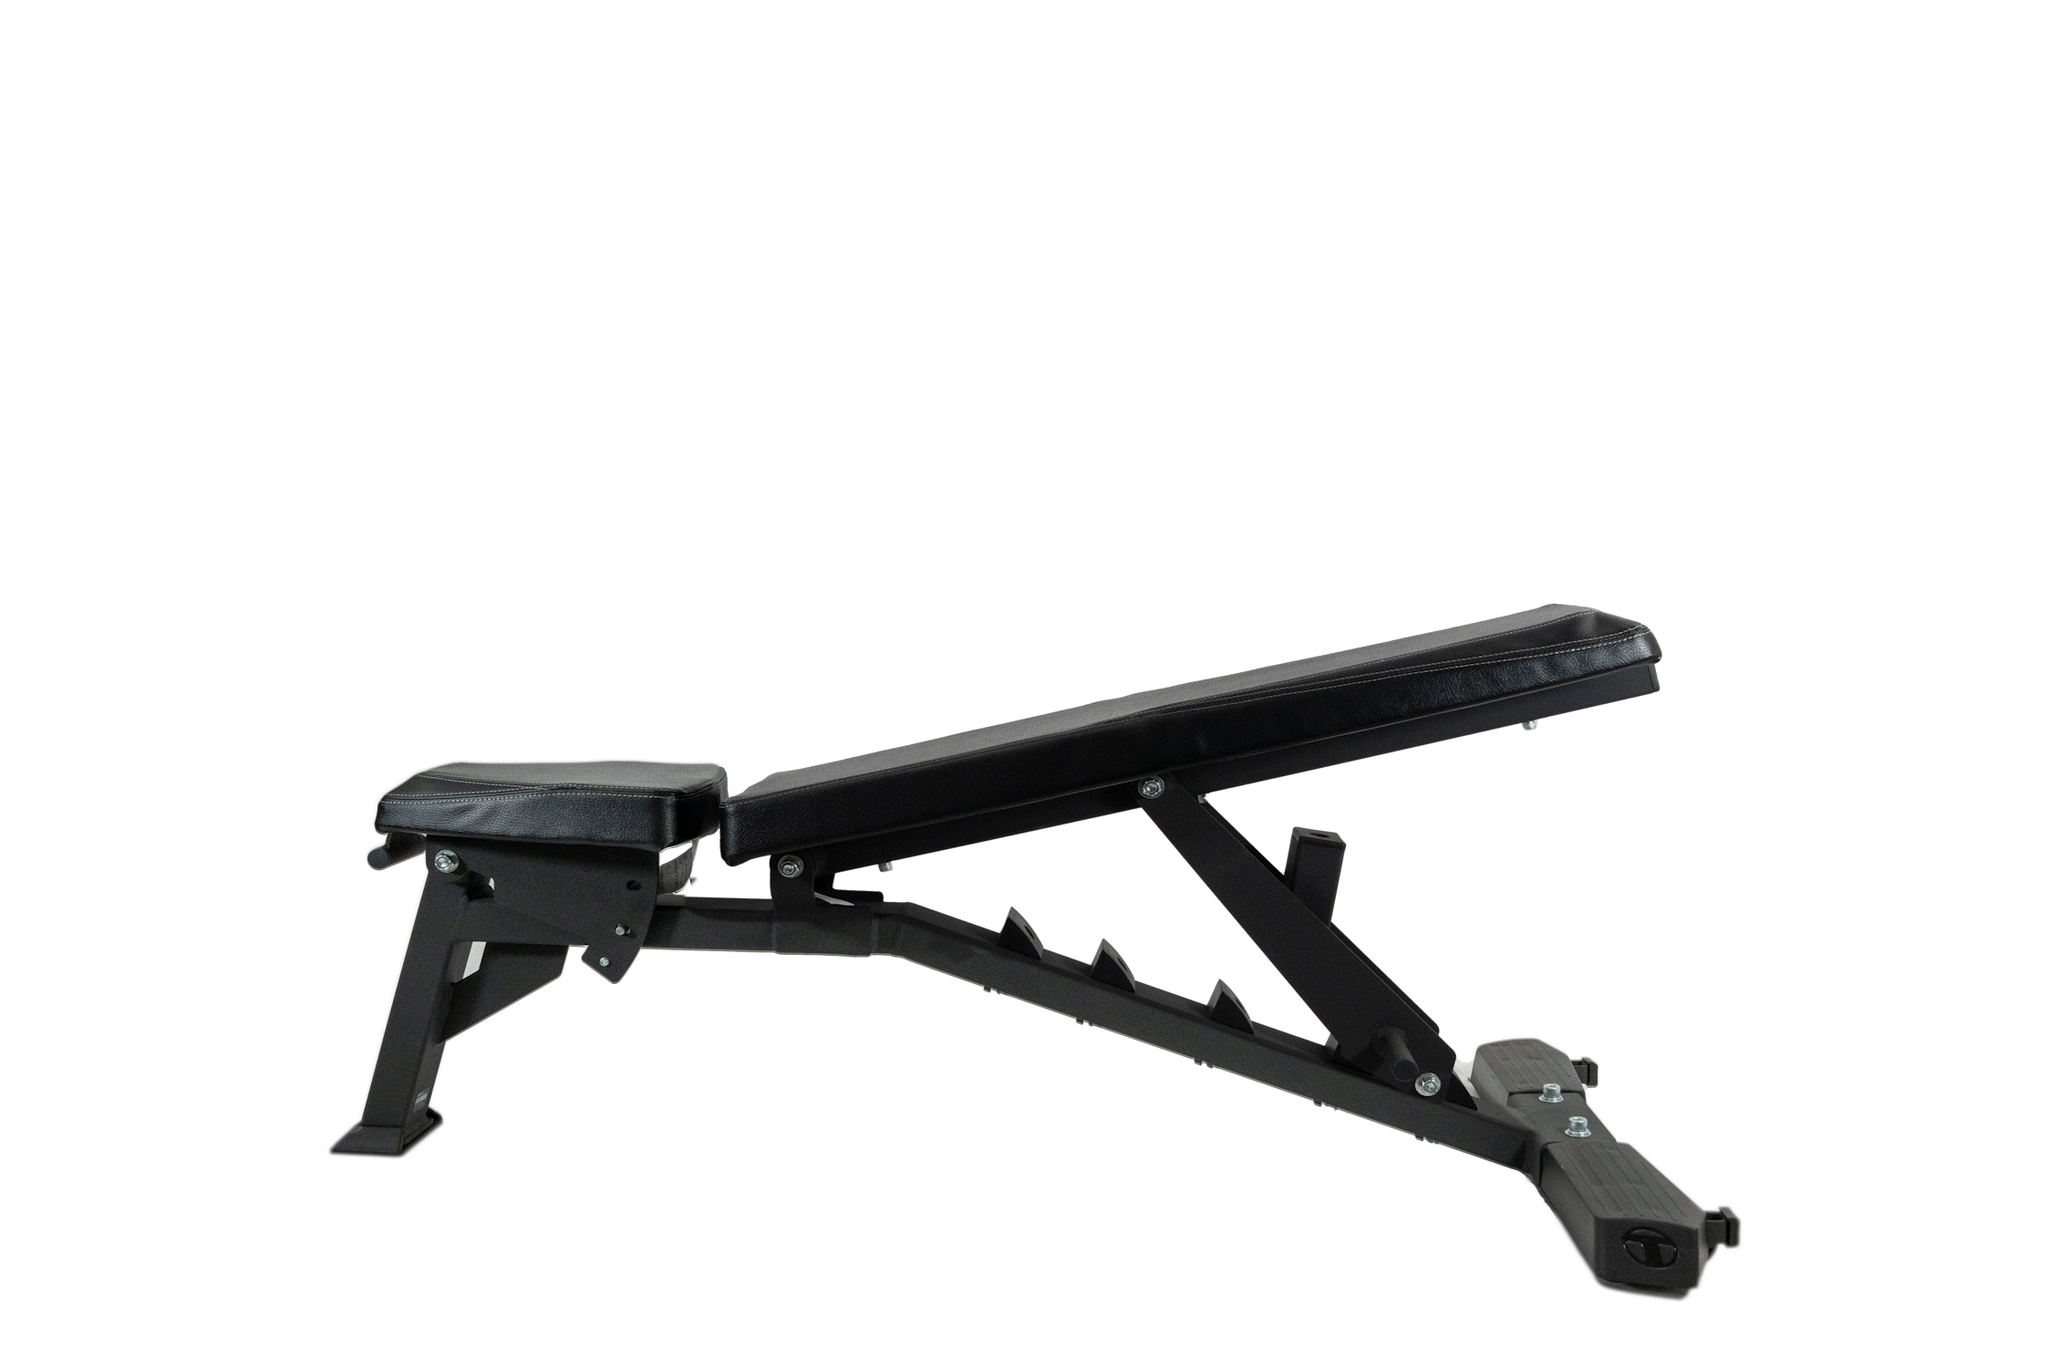 Flat-Incline Bench